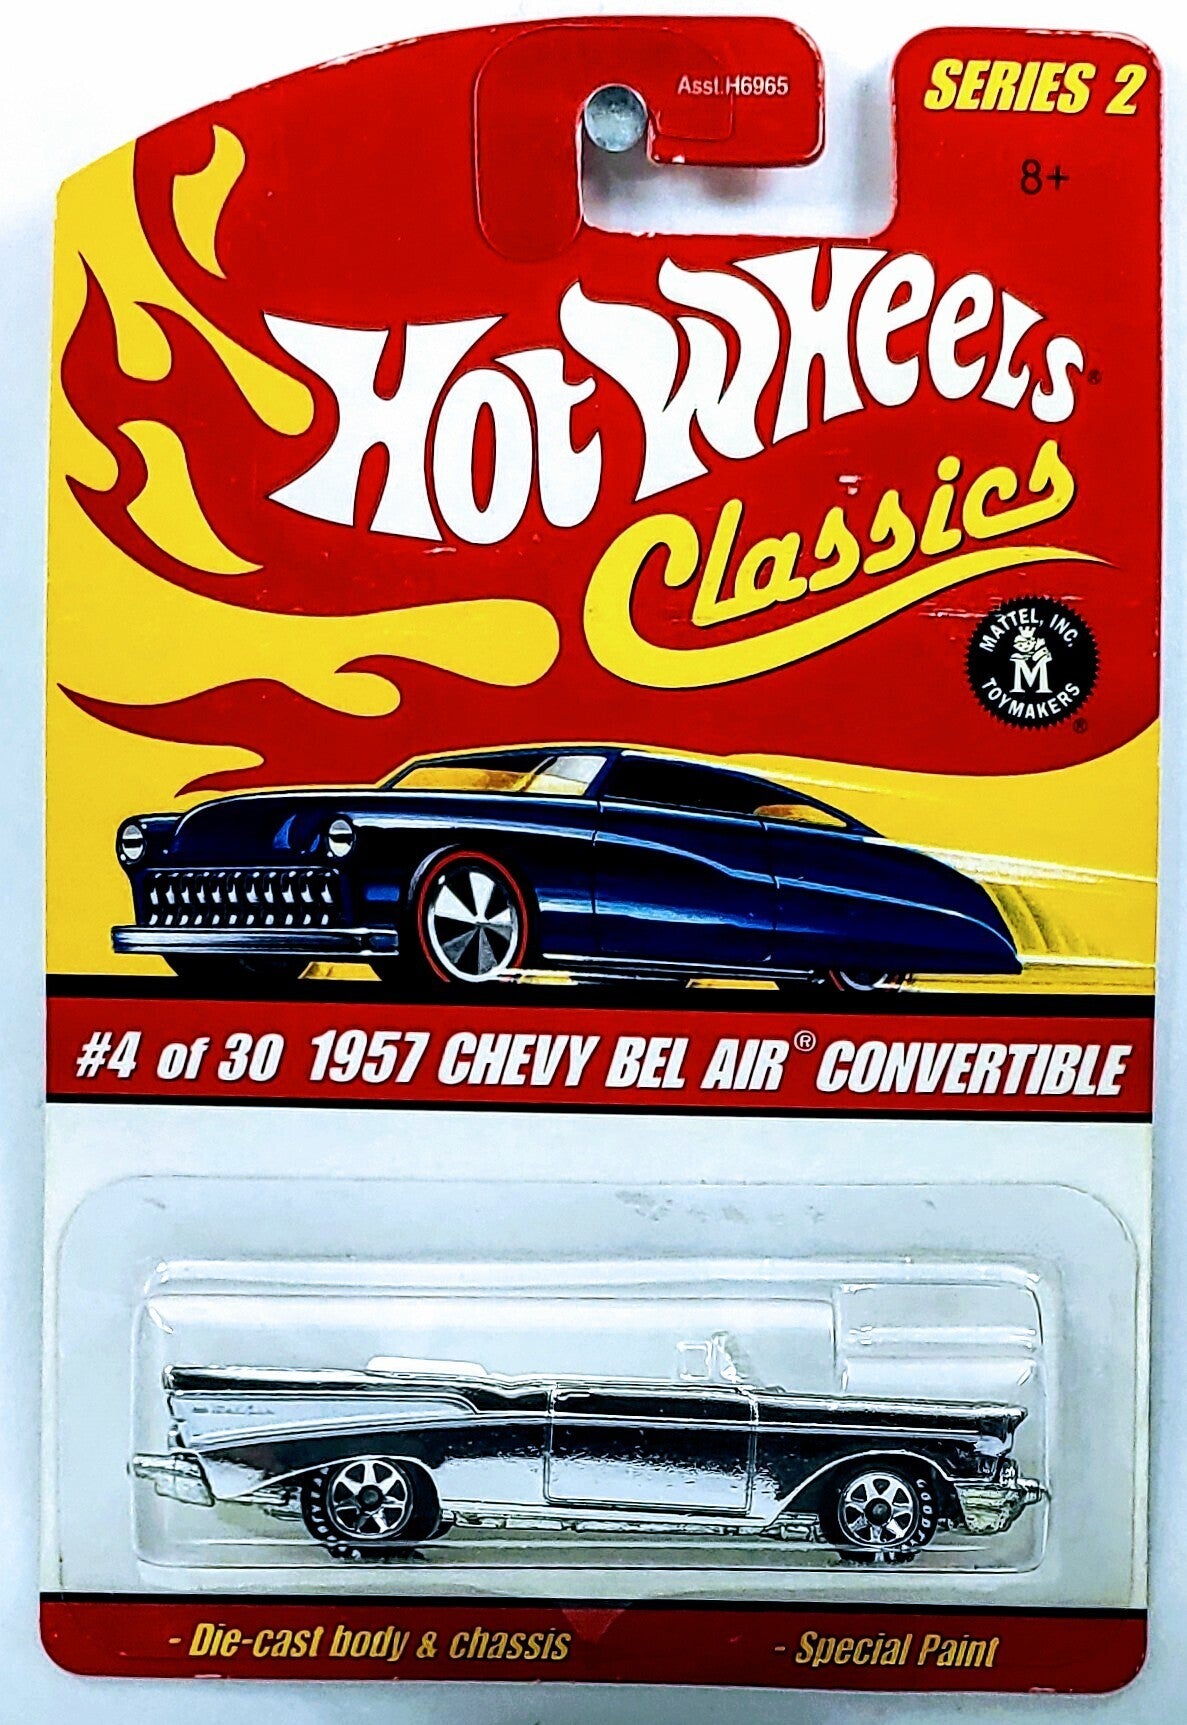 Hot Wheels 2006 - Classics Series 2 # 04/30 - 1957 Chevy Bel Air Convertible - Chrome - 7 Spokes with Goodyear Tires - Metal/Metal - New Casting!